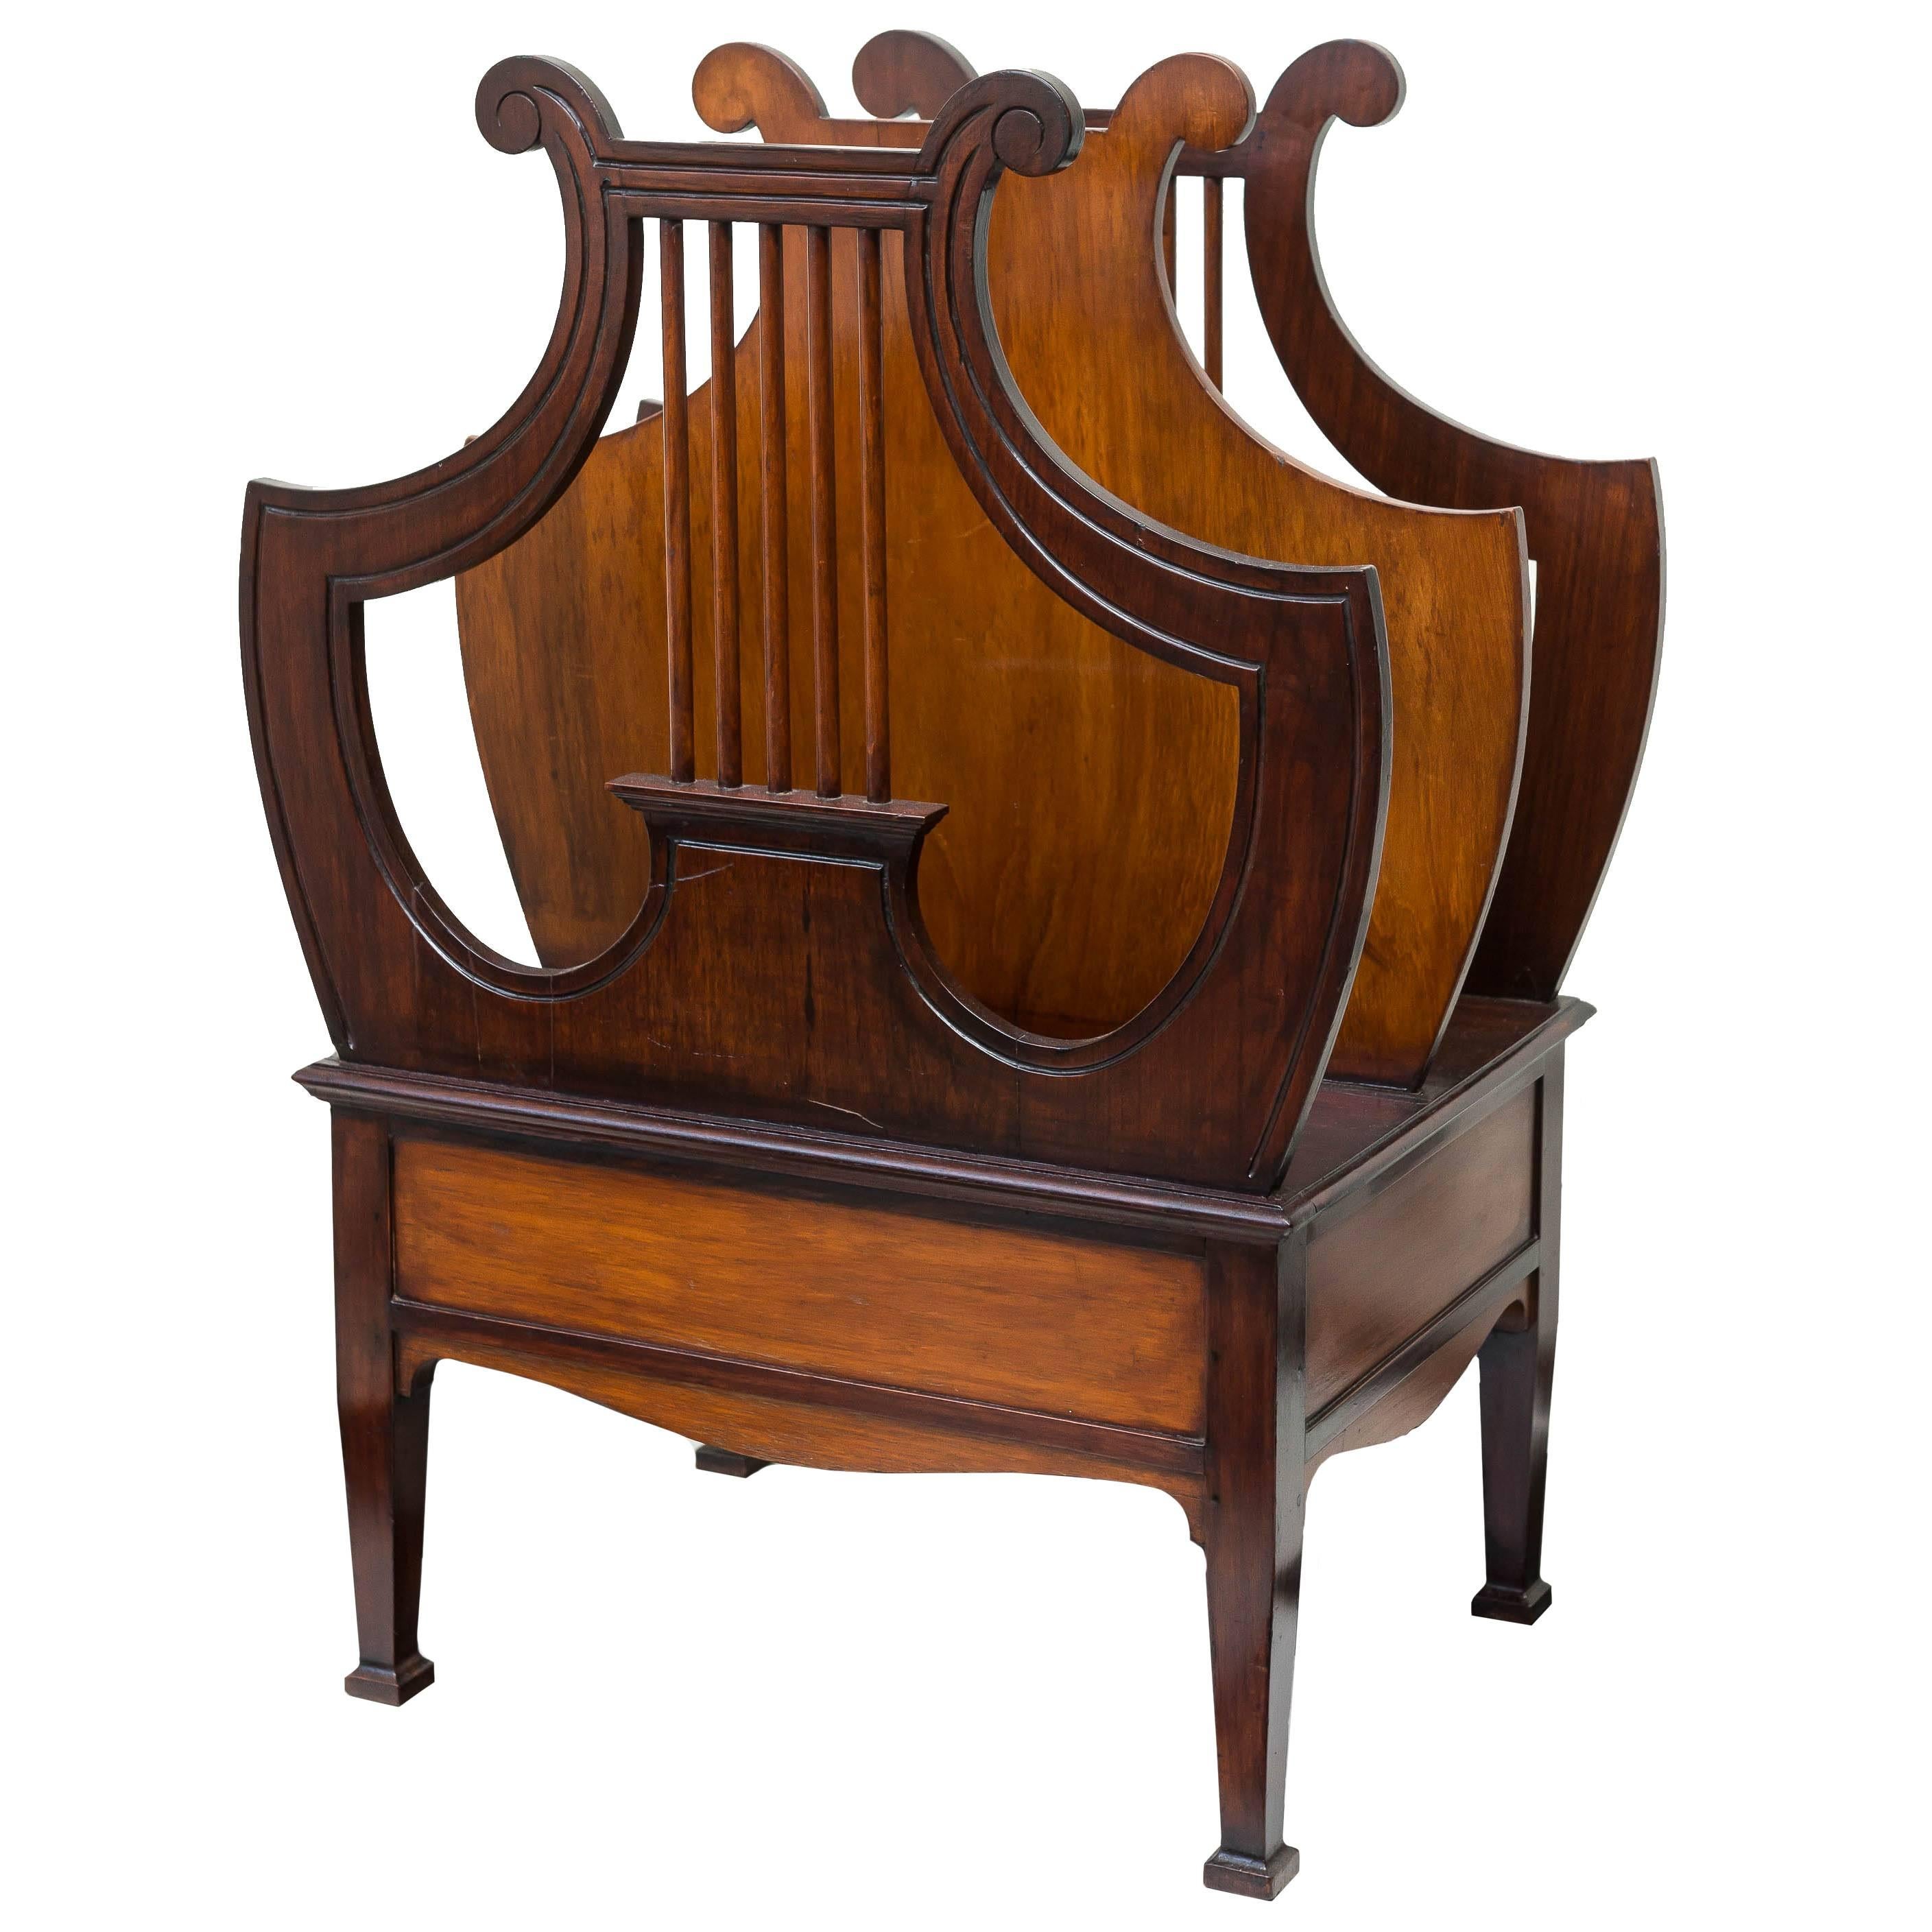 Late 19th Century English Rosewood Lyre Form Music/Folio Stand